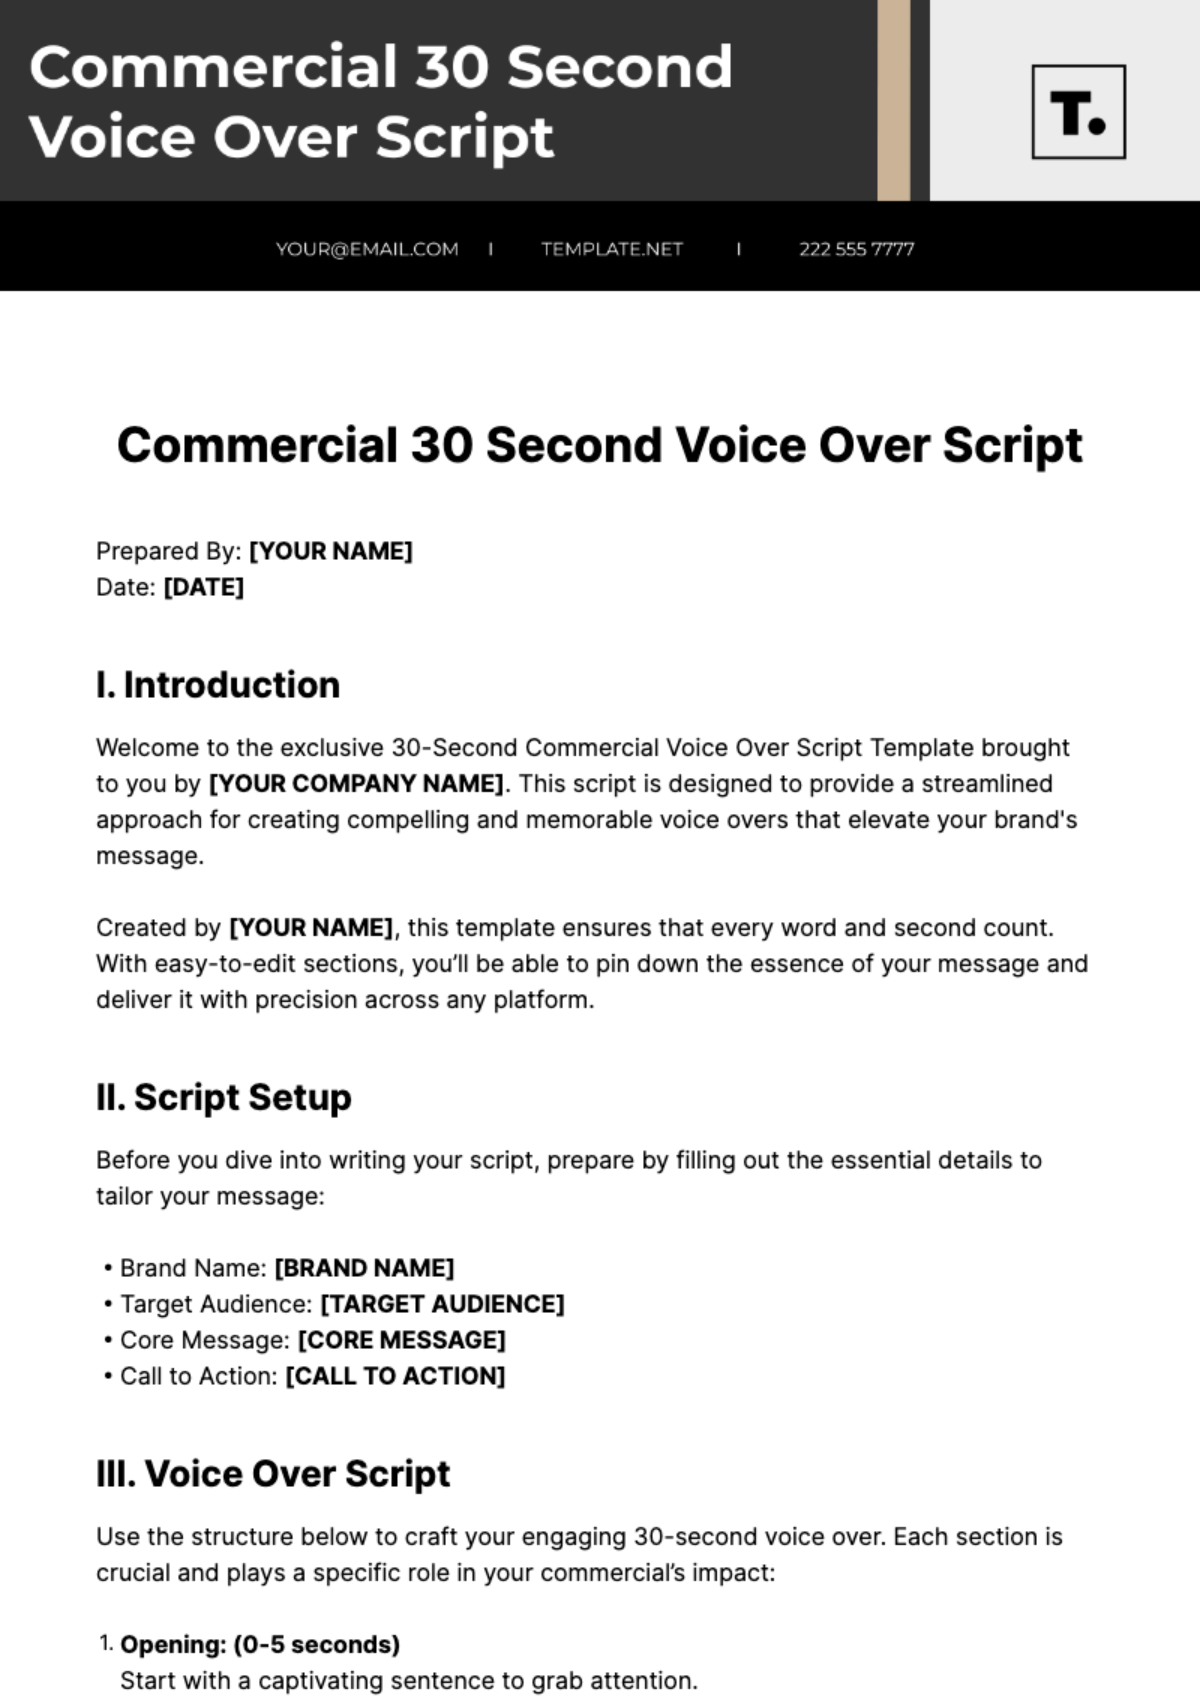 Commercial 30 Second Voice Over Script Template